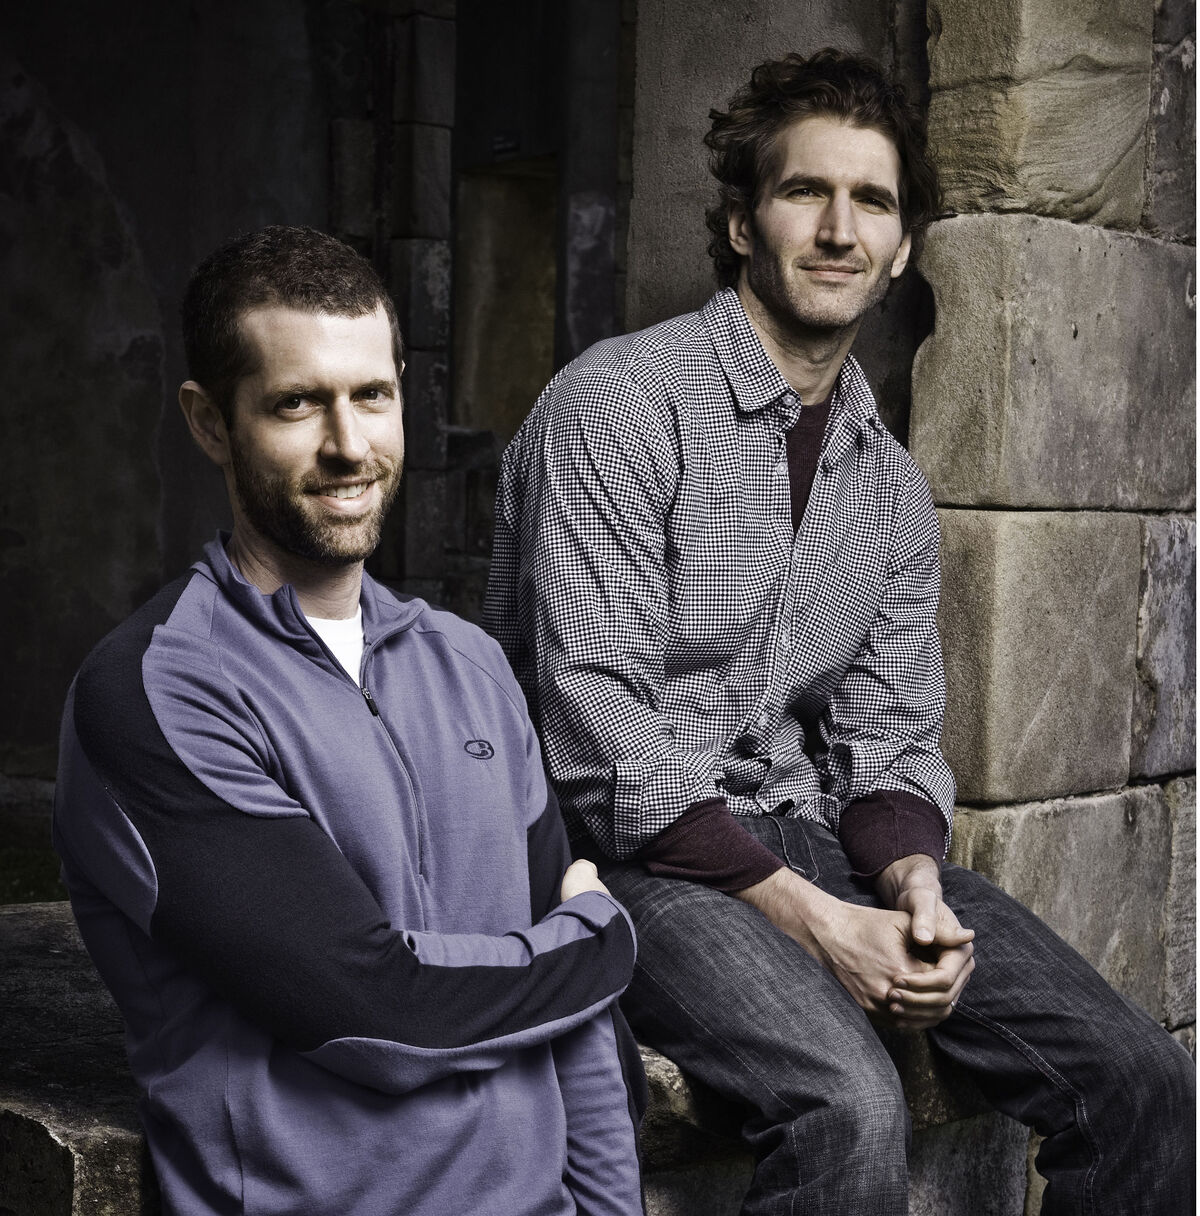 Game of Thrones creators David Benioff and D.B. Weiss.